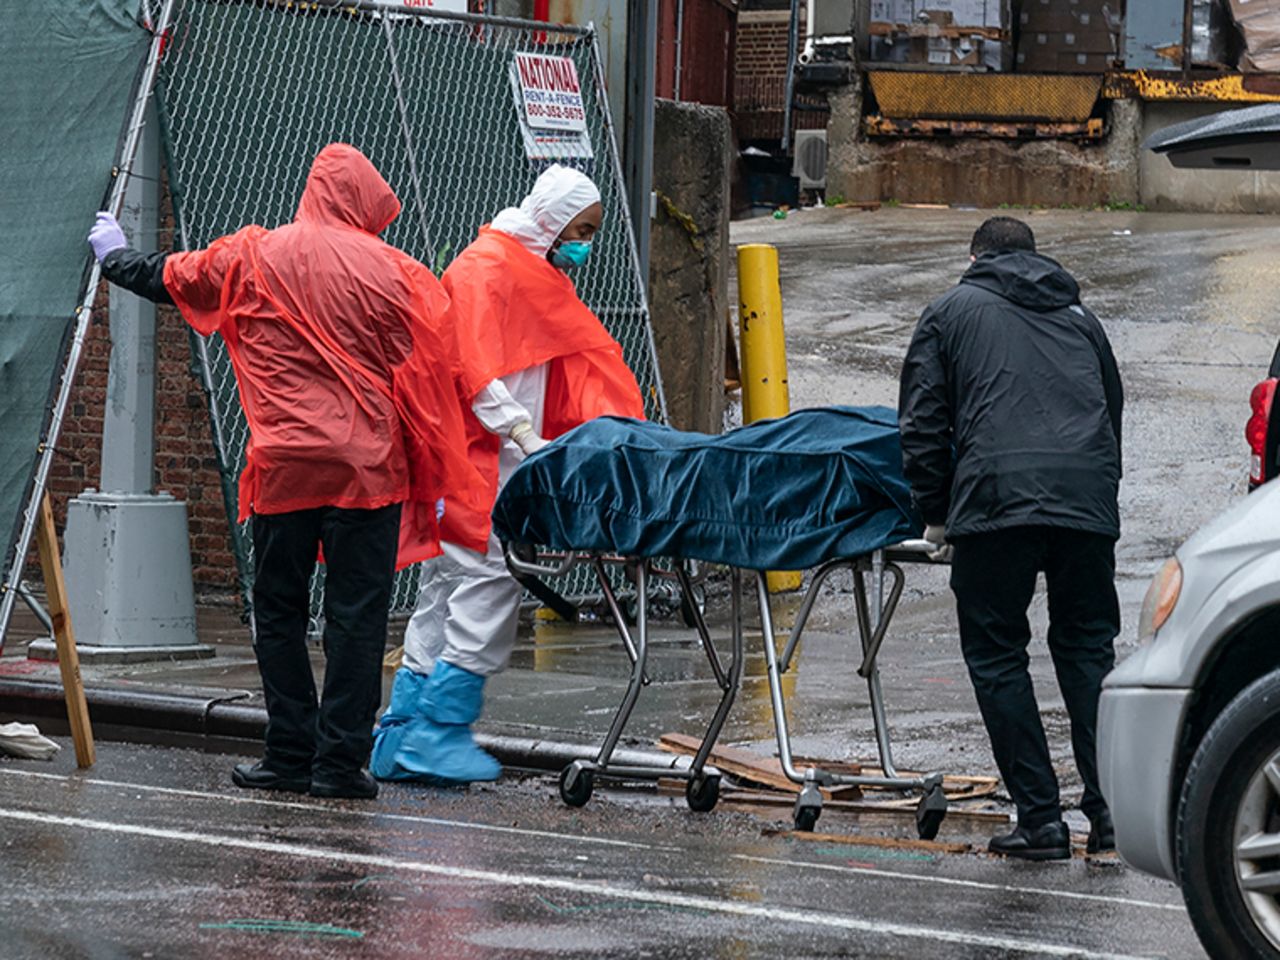 Funeral workers and hospital staff retrieve deceased bodies for burial at the Brooklyn Hospital Center on Monday, April 13, in New York.